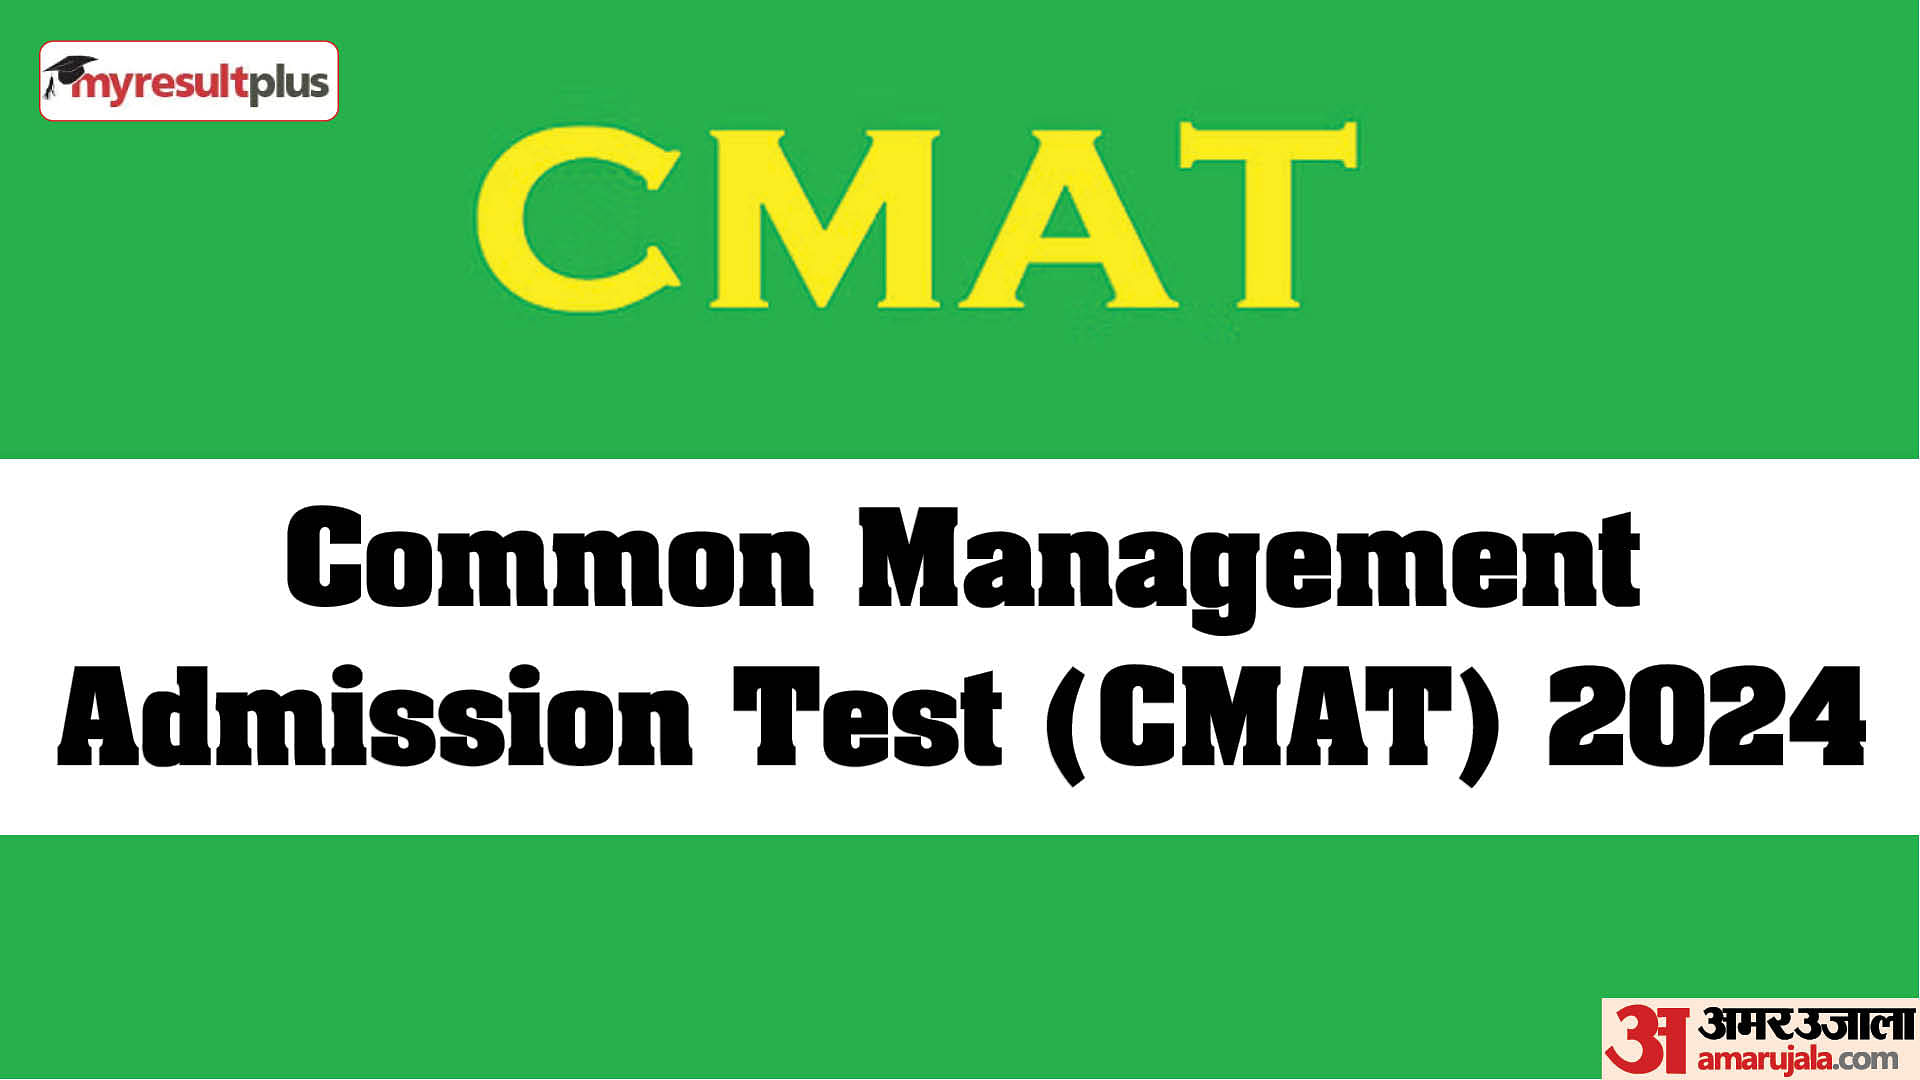 CMAT 2024 Registration: Application window for Common Management Admission Test closing today, Apply here now